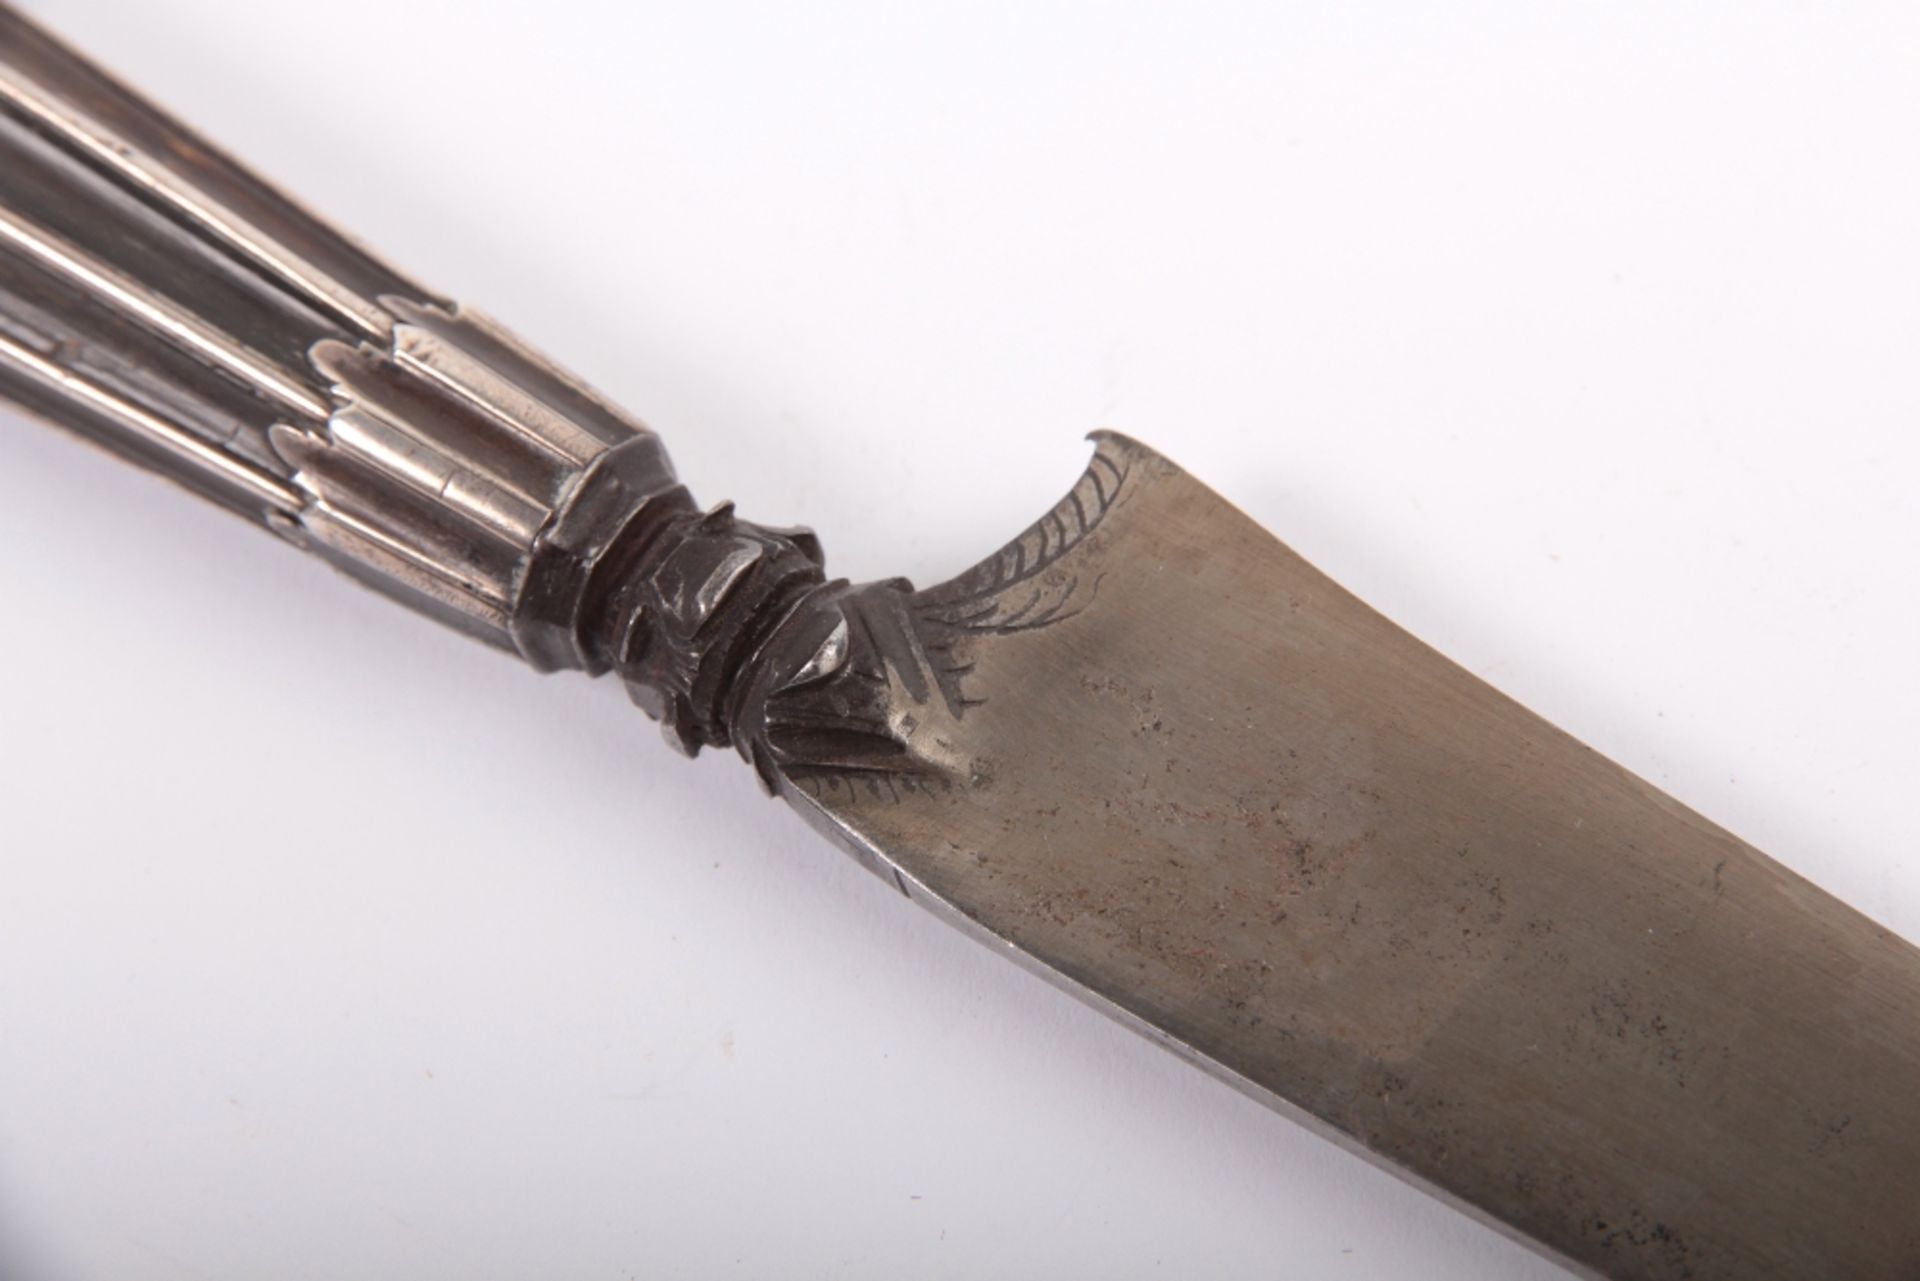 Late 18th Century Silver Mounted Neapolitan Dagger - Image 8 of 10